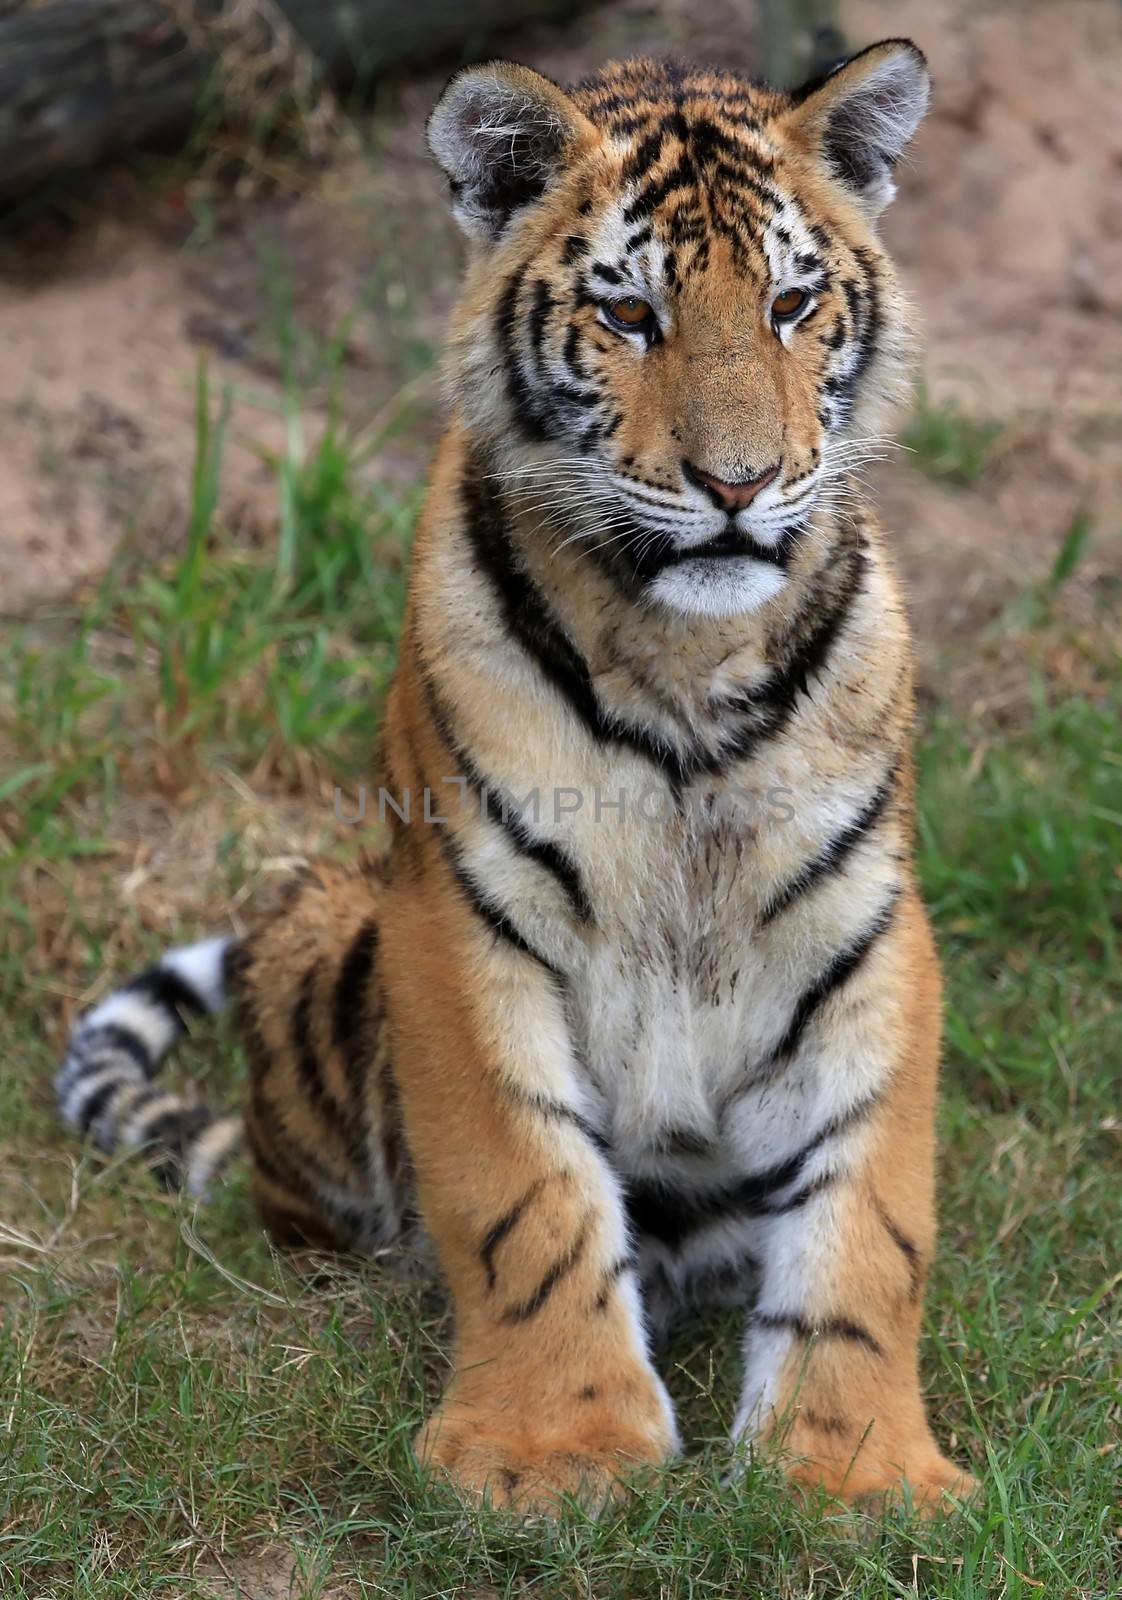 Young tiger with beautiful striped fur sitting on the grass